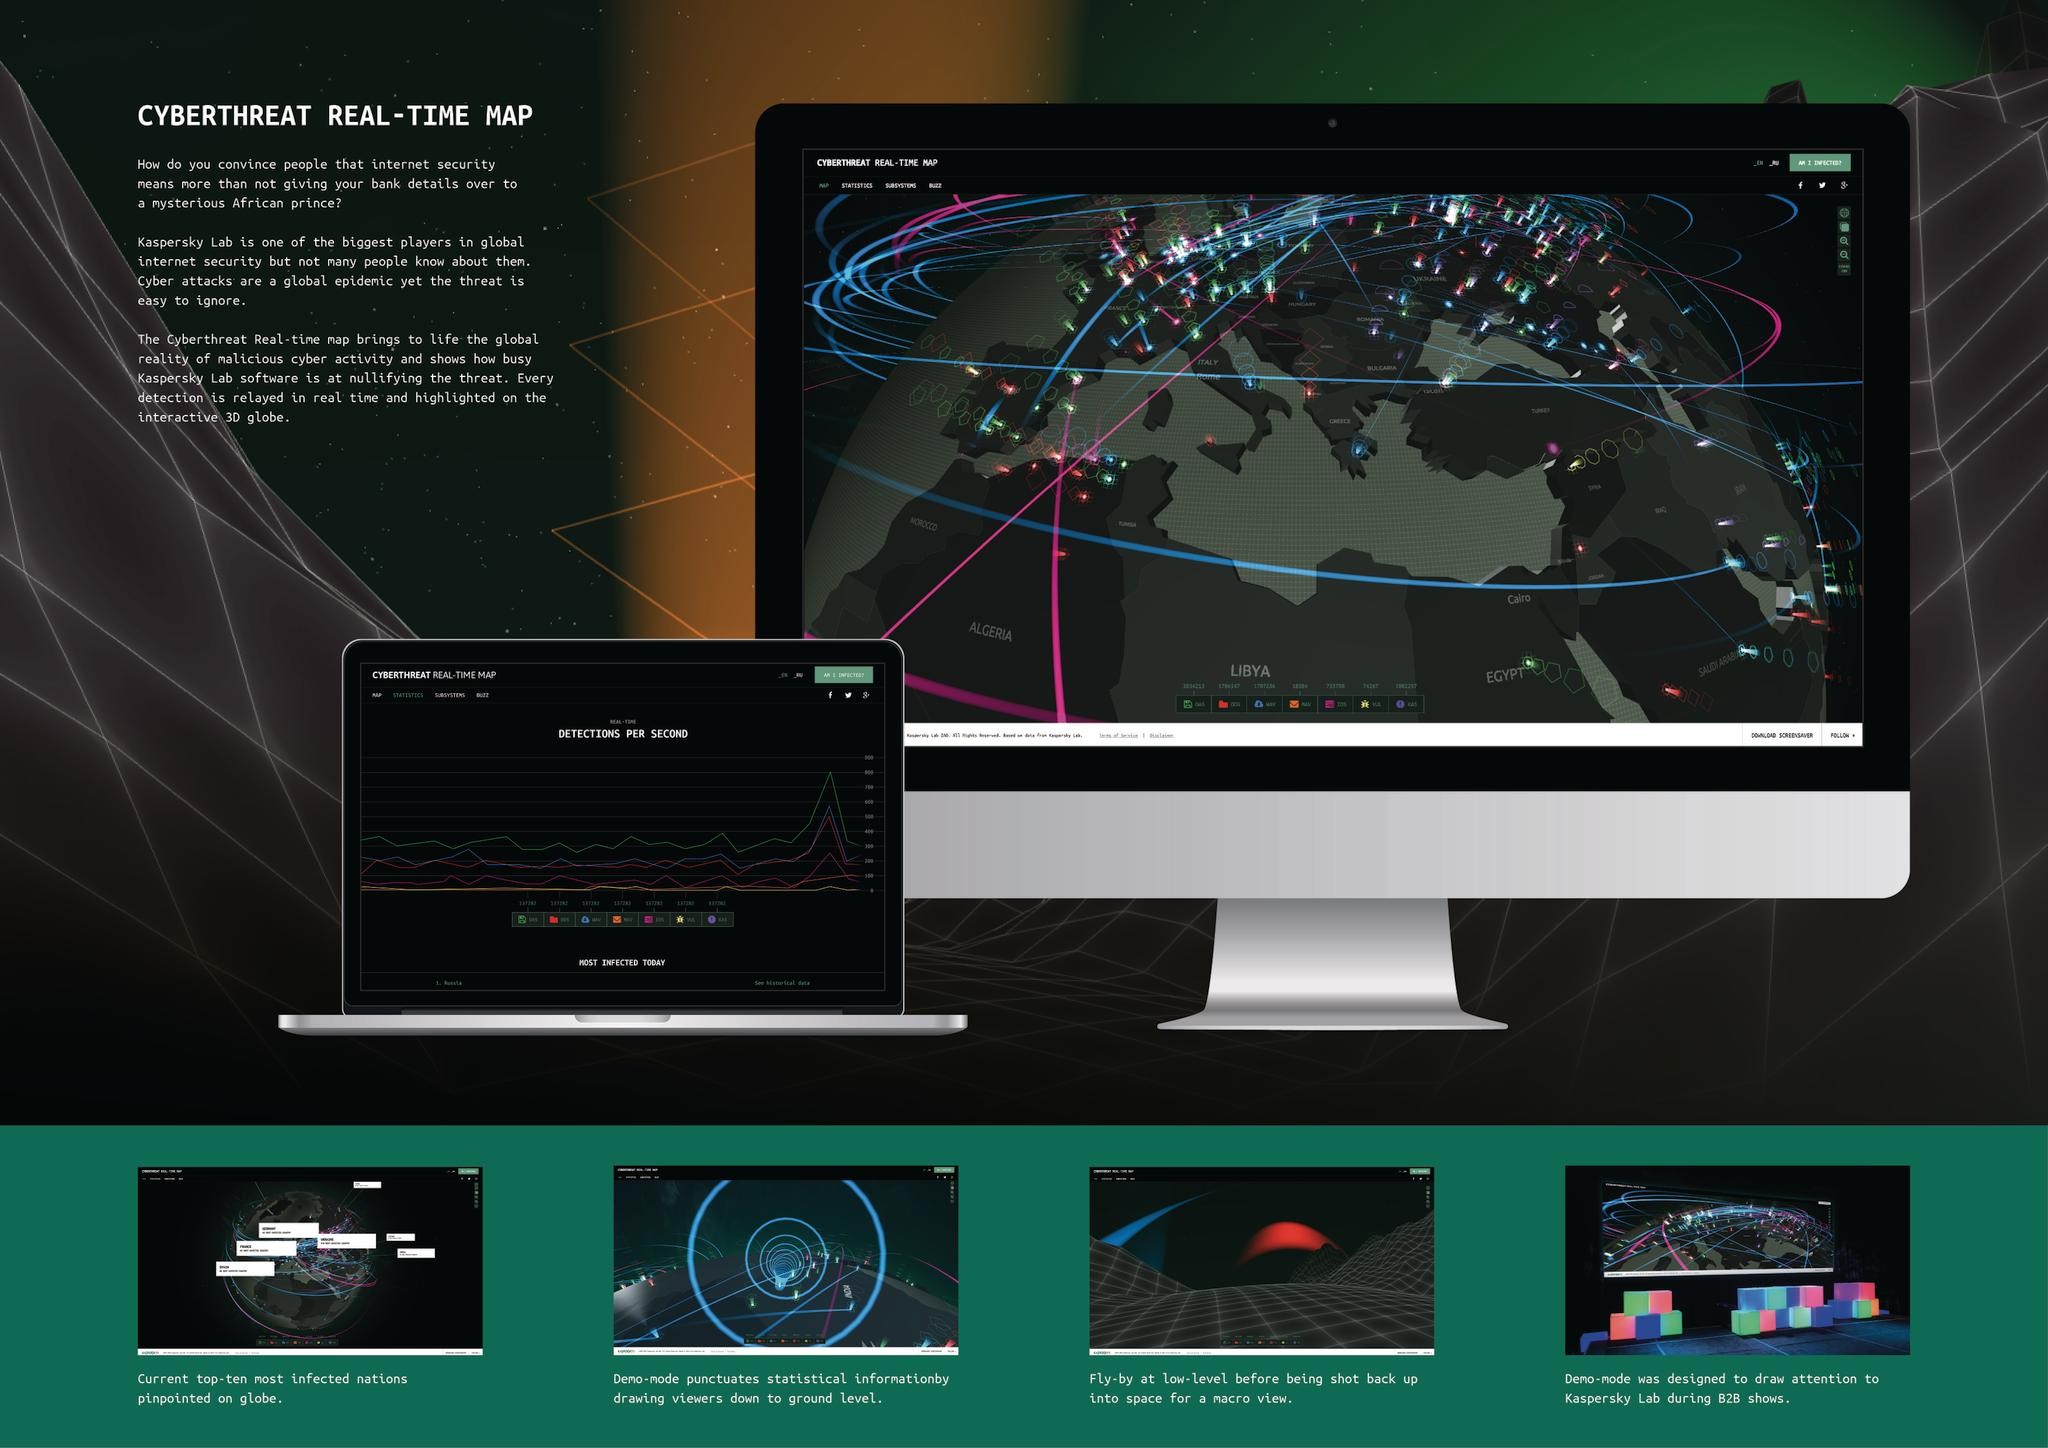 KASPERSKY CYBER-THREAT REAL TIME MAP